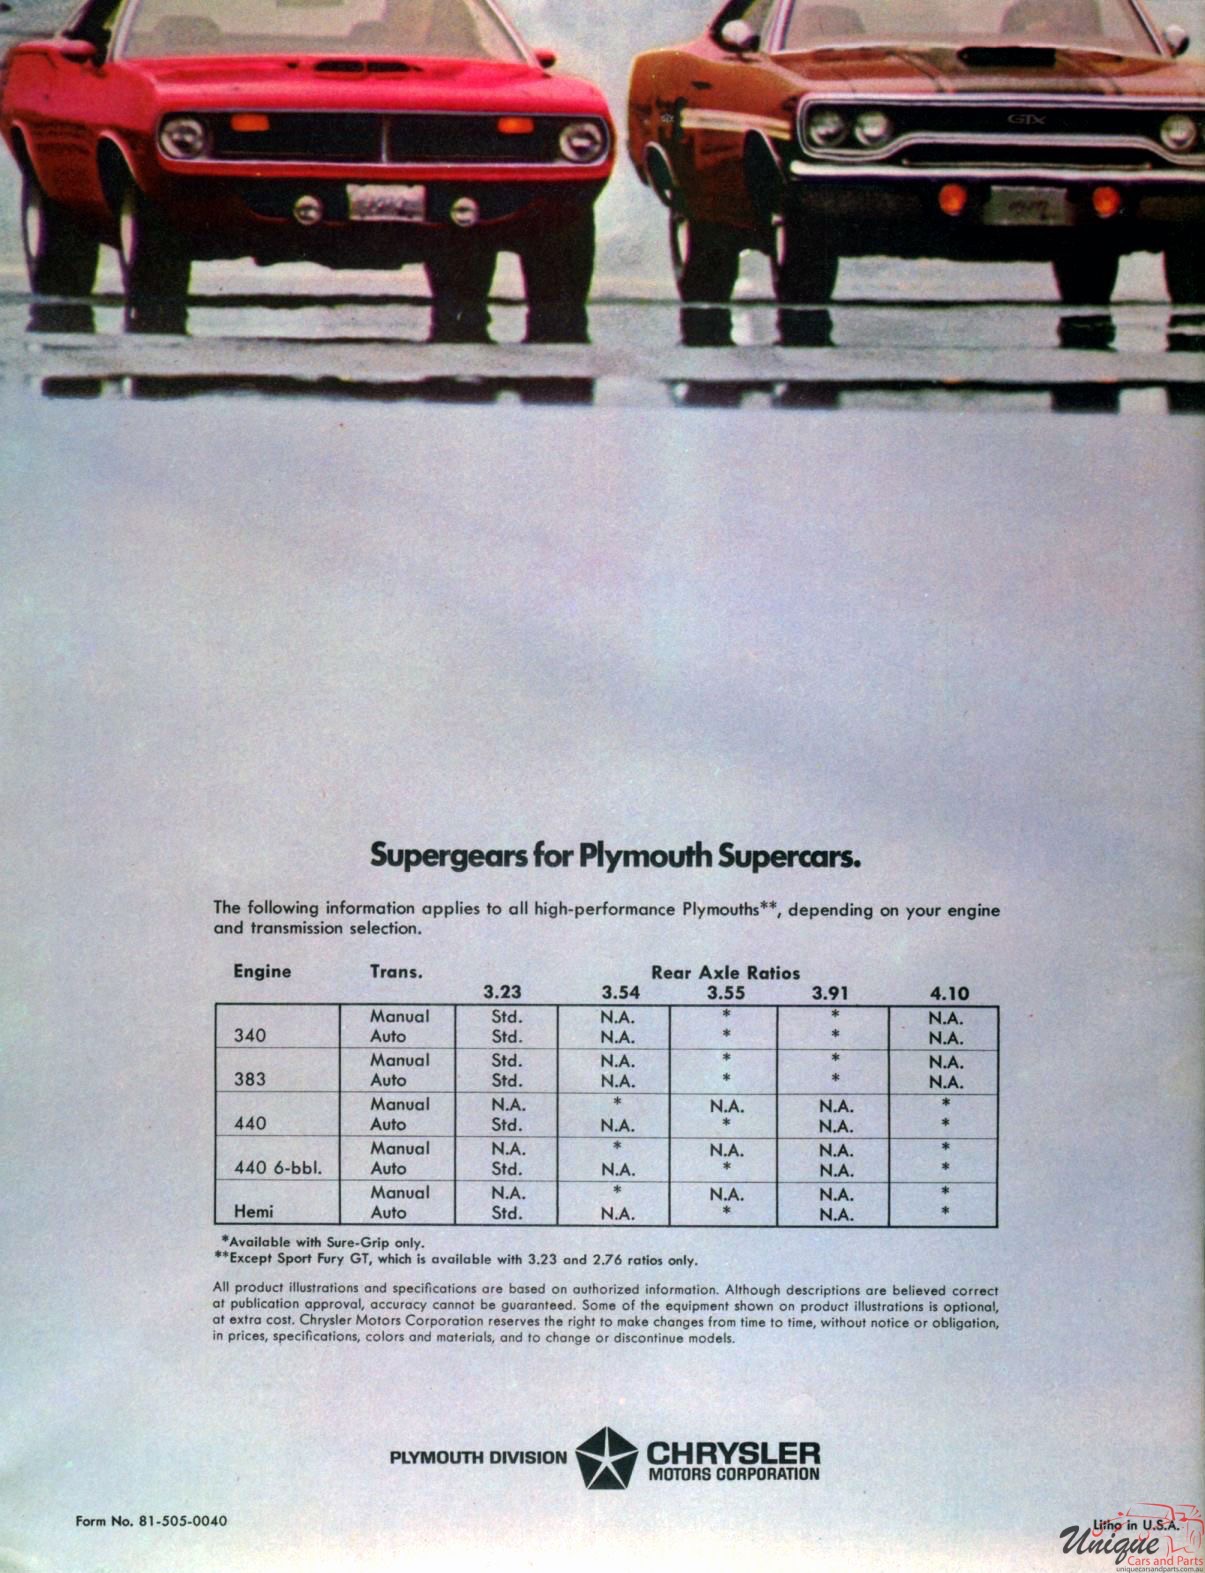 1970 Plymouth Rapid Transit System Brochure Page 9